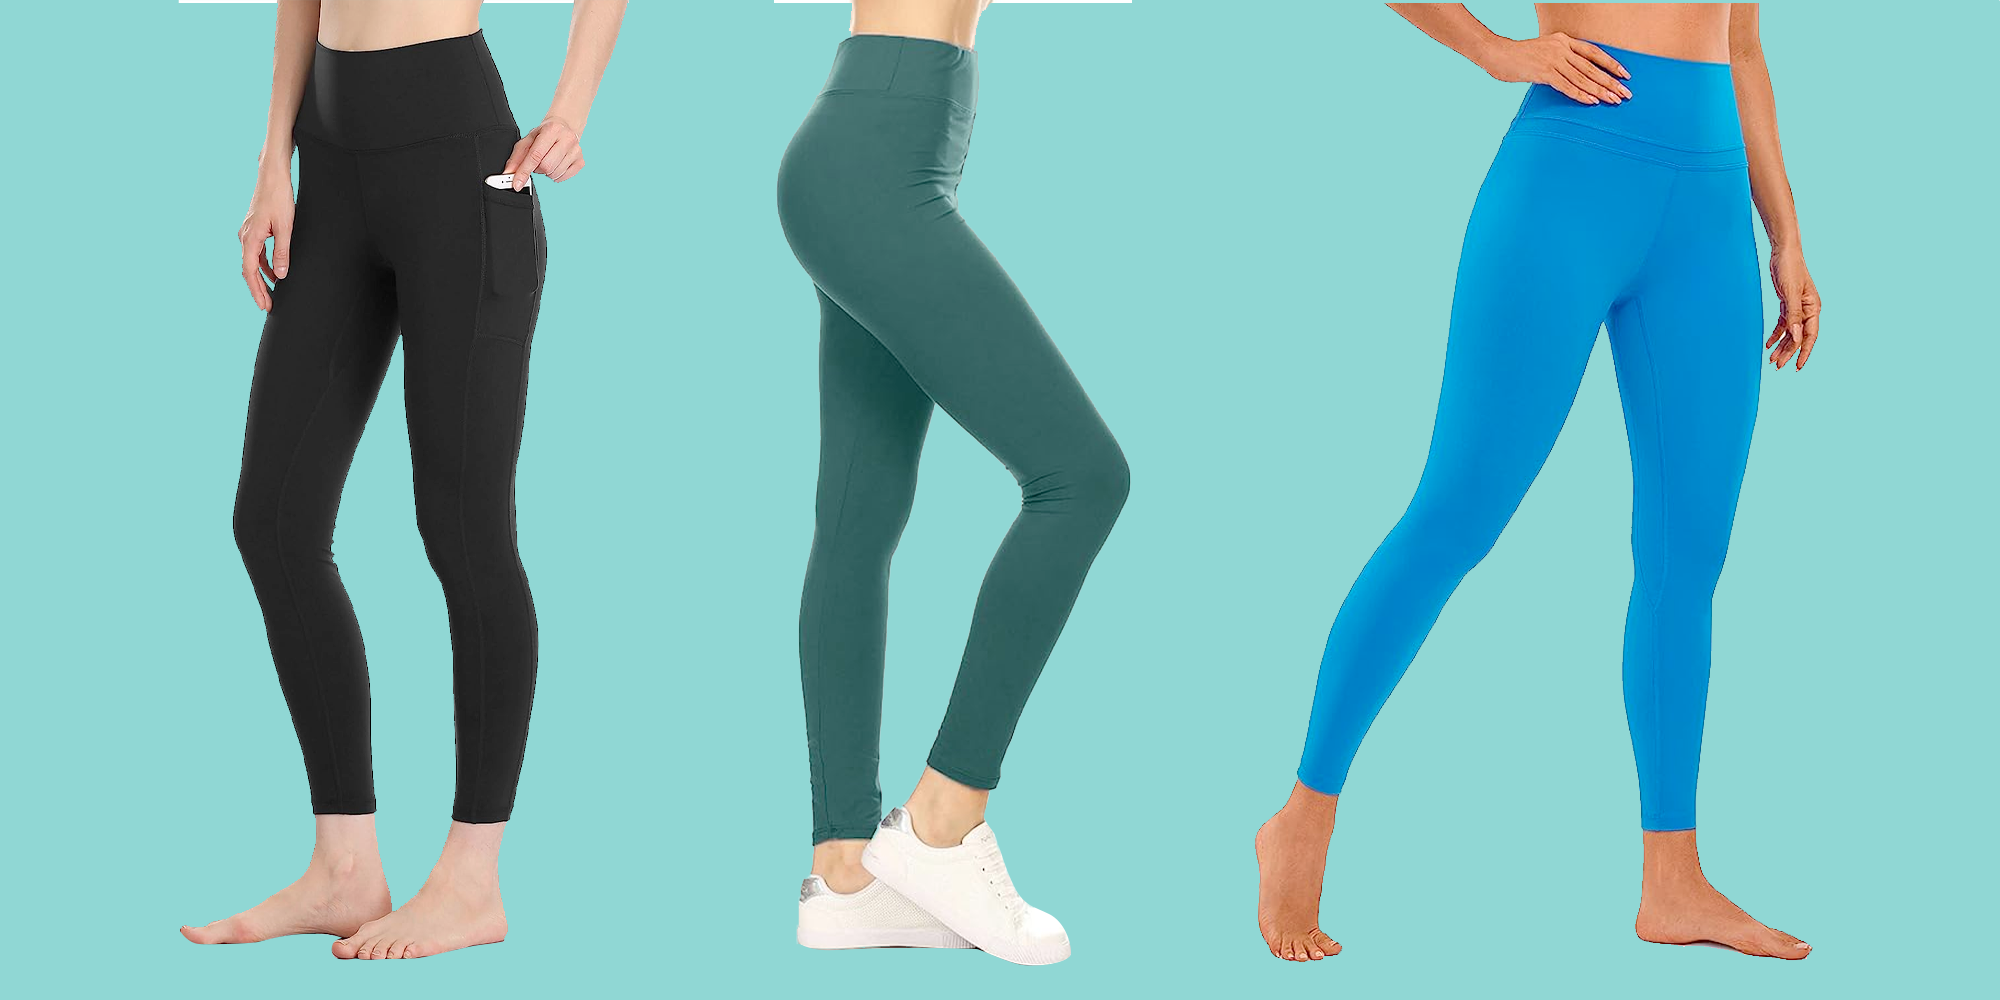 These Top Tested Workout Leggings Have Over 45,000 Amazon Reviews